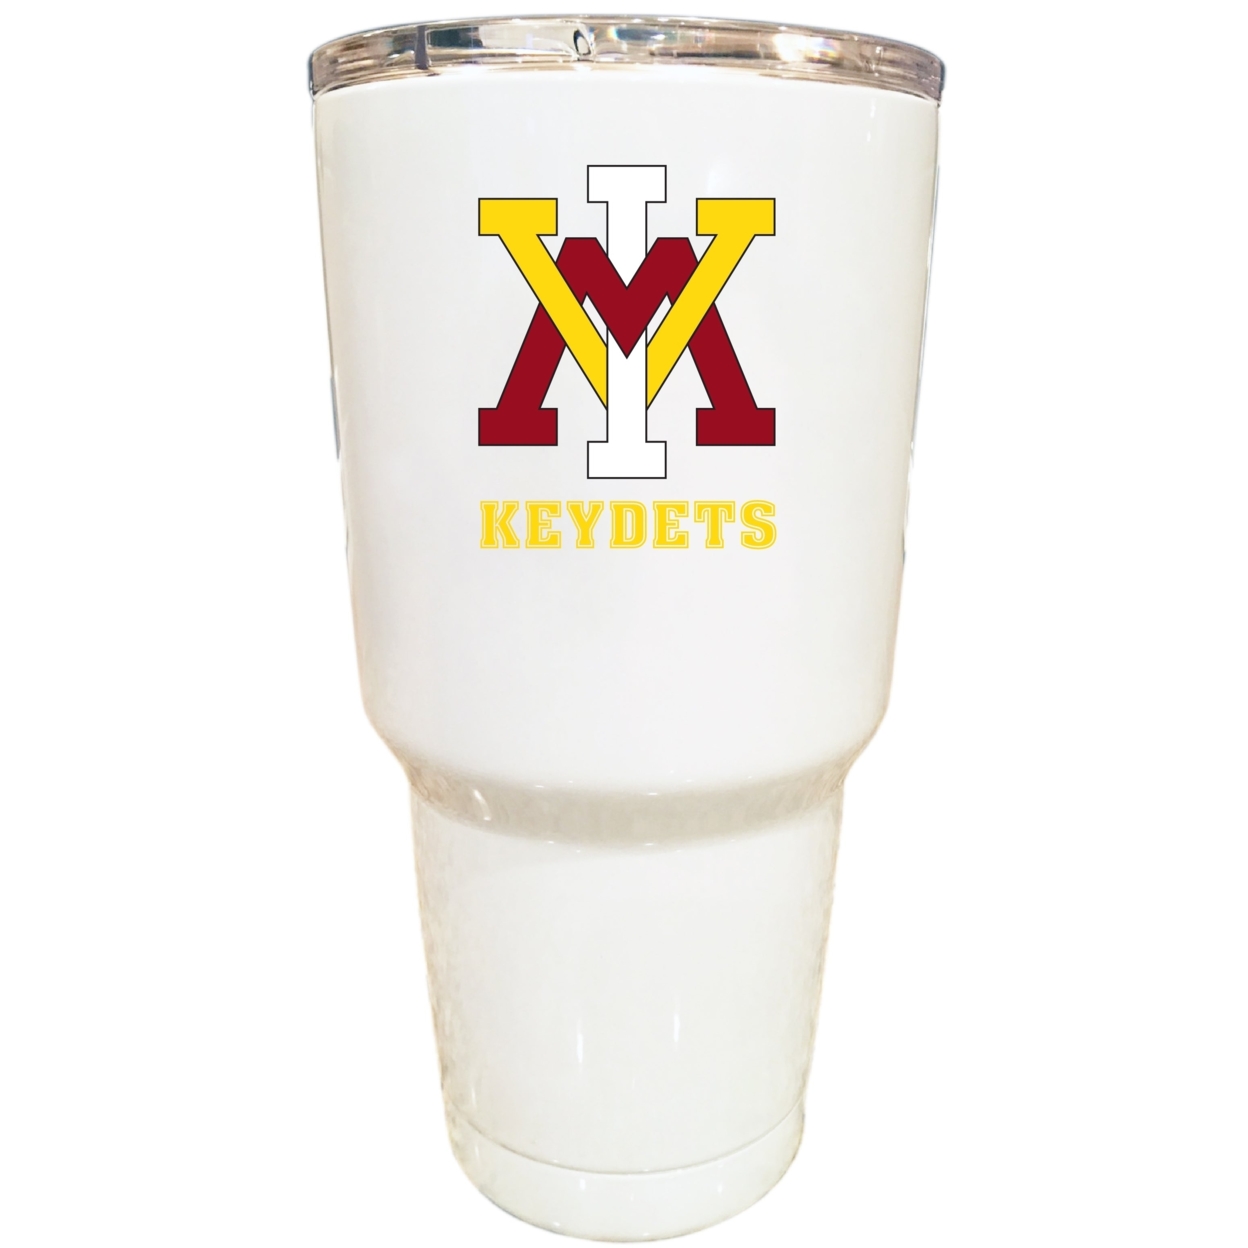 VMI Keydets 24 Oz Choose Your Color Insulated Stainless Steel Tumbler - White